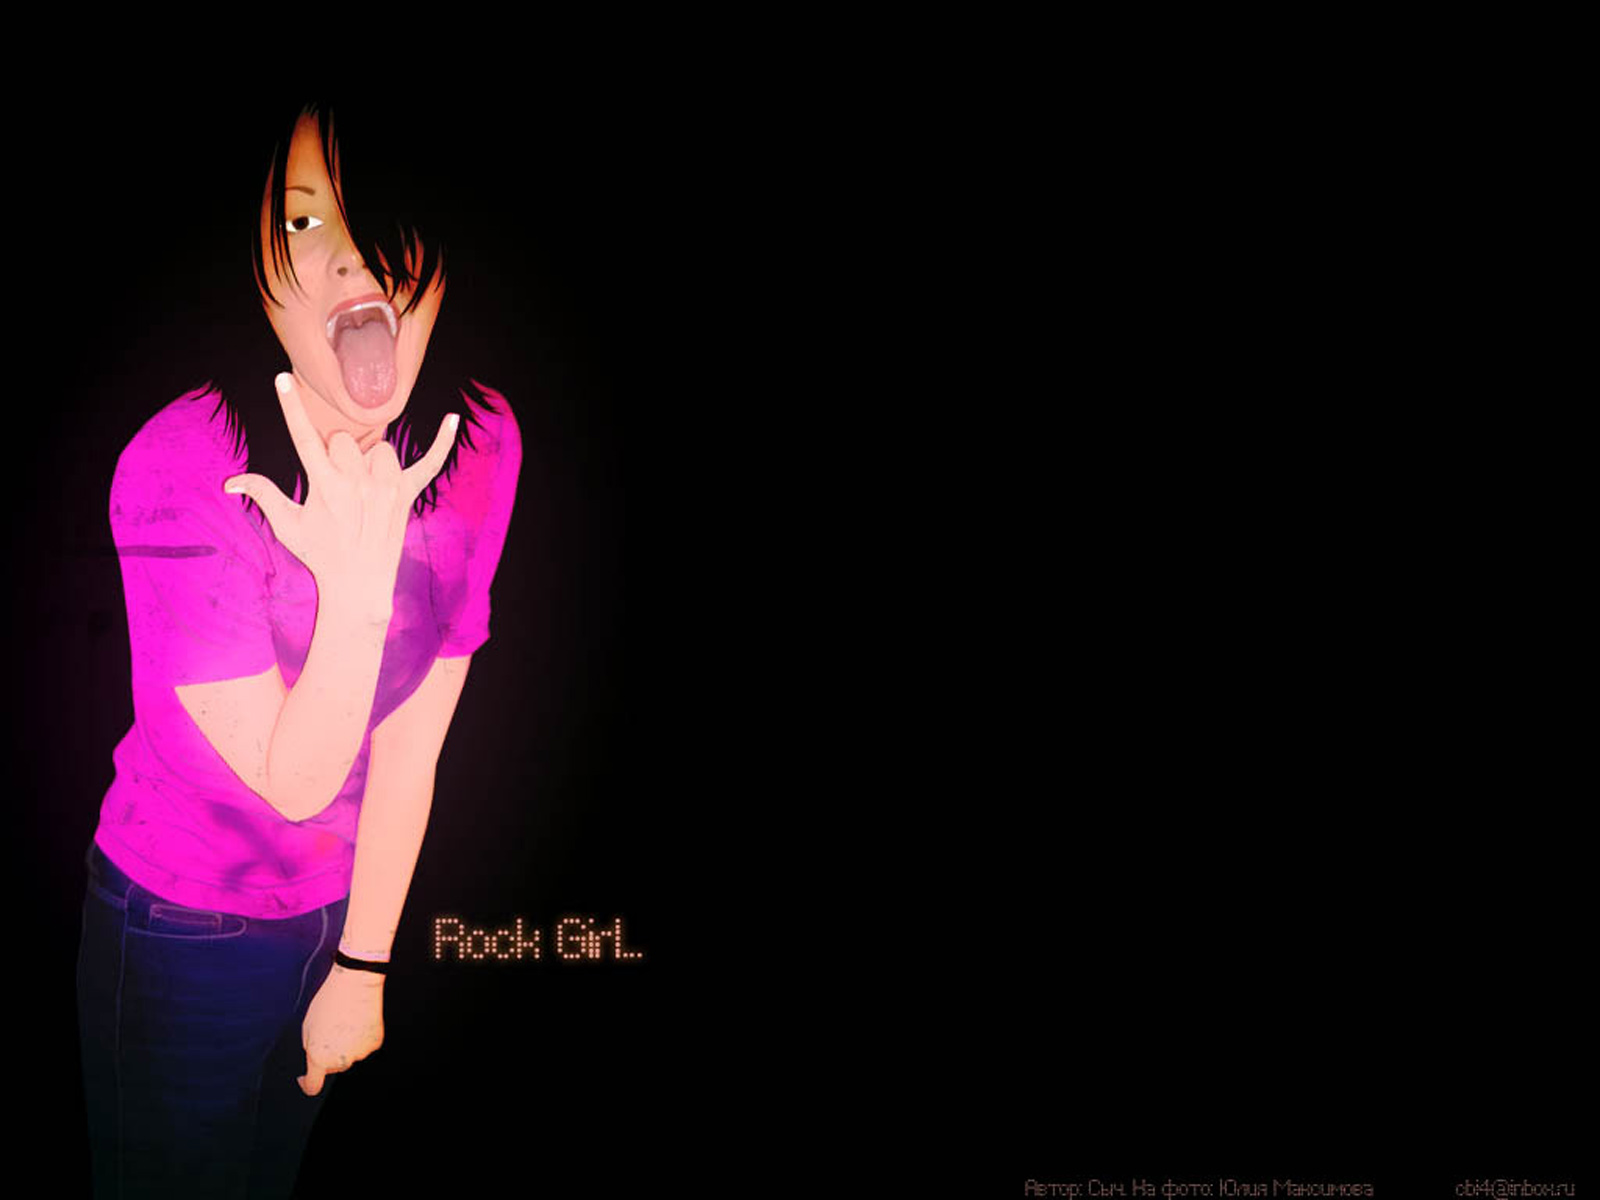 Emo rock girl wallpapers and images   wallpapers pictures photos 1600x1200